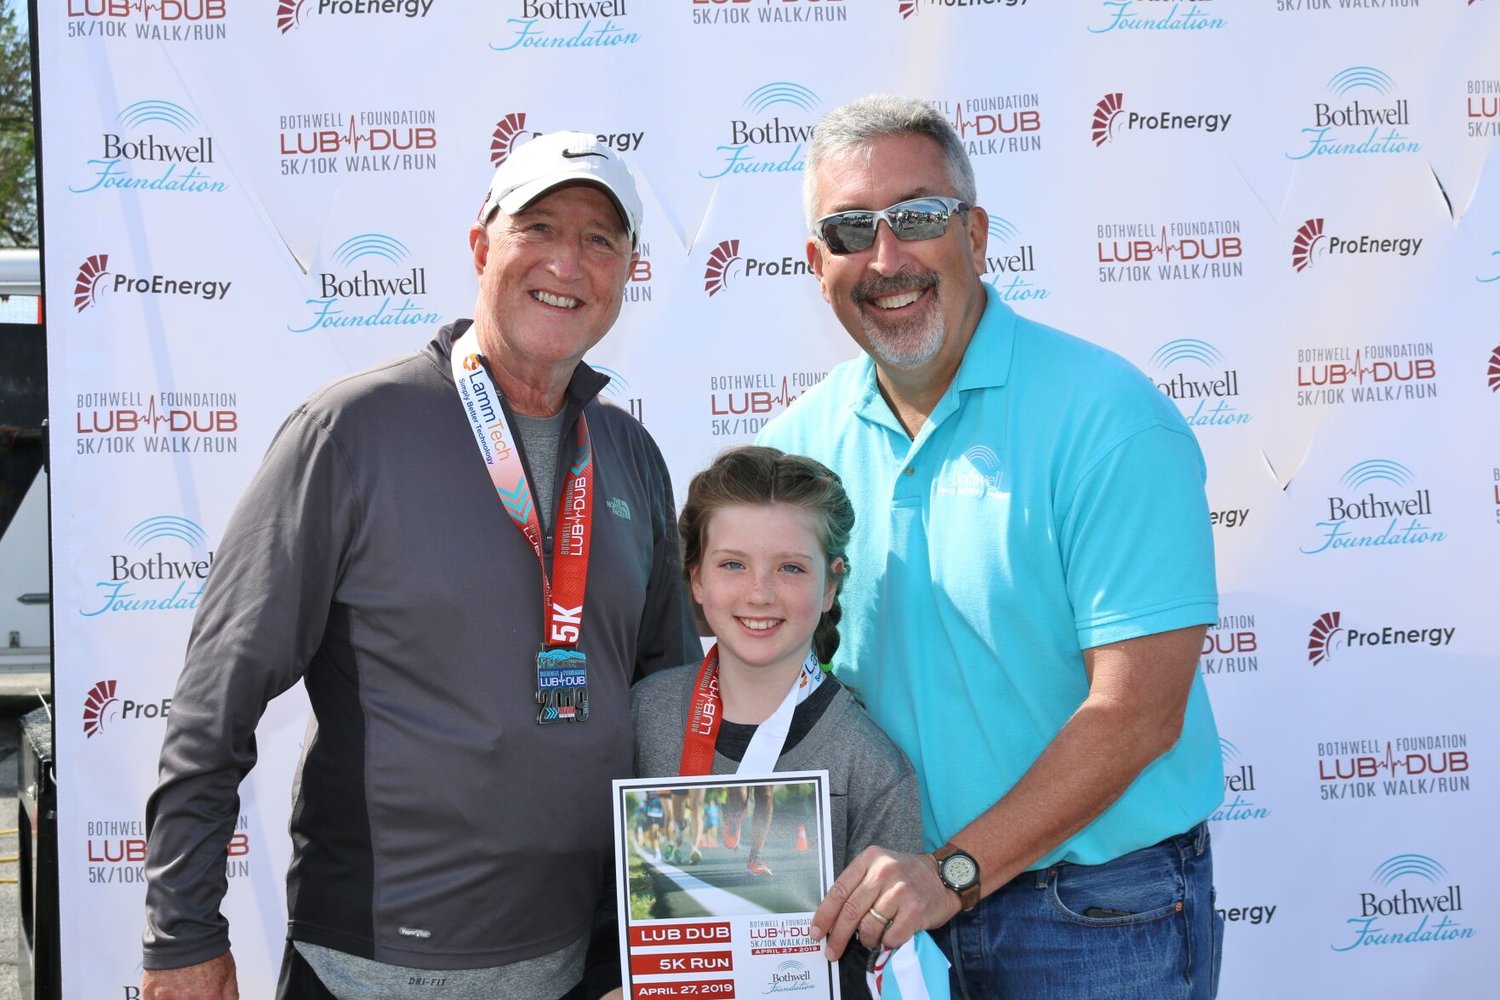 In 2019 as foundation board president, Swearingen presented Cliff and Ascher Callis with a race award at the foundation’s annual Lub Dub and 5K/10K Walk/Run.